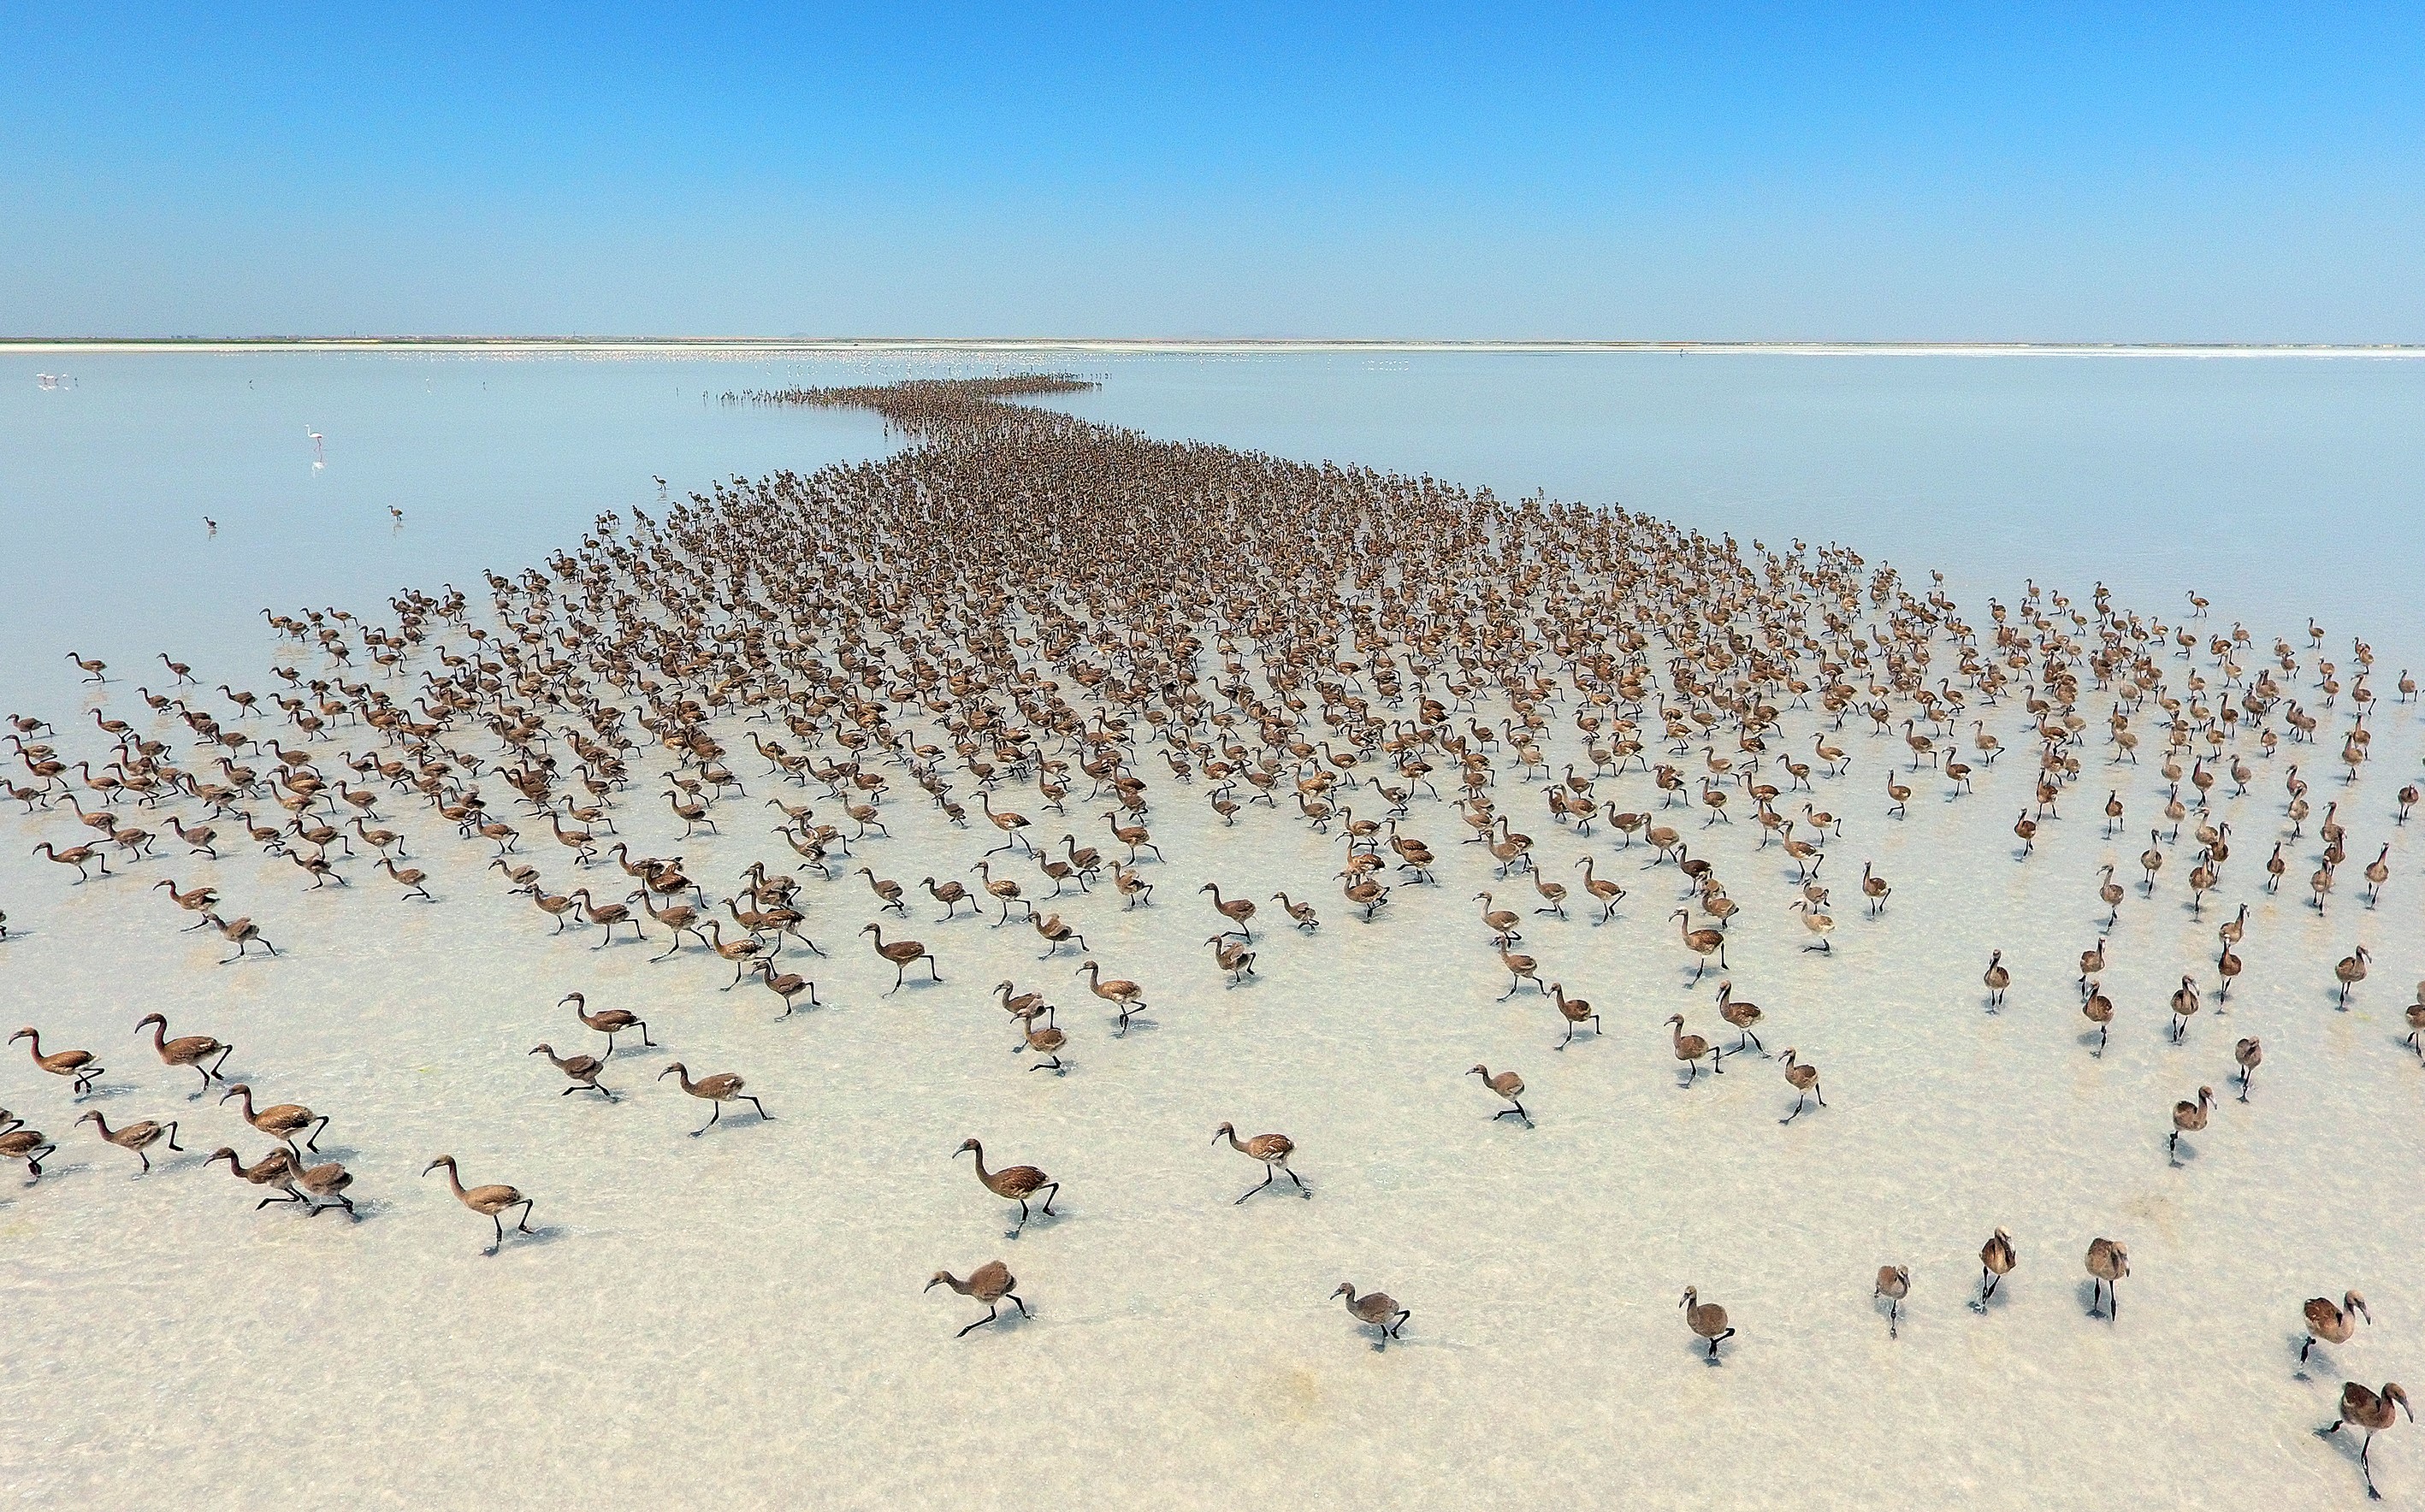 Flamingo chicks emerge from their nests in Turkey's Aksaray